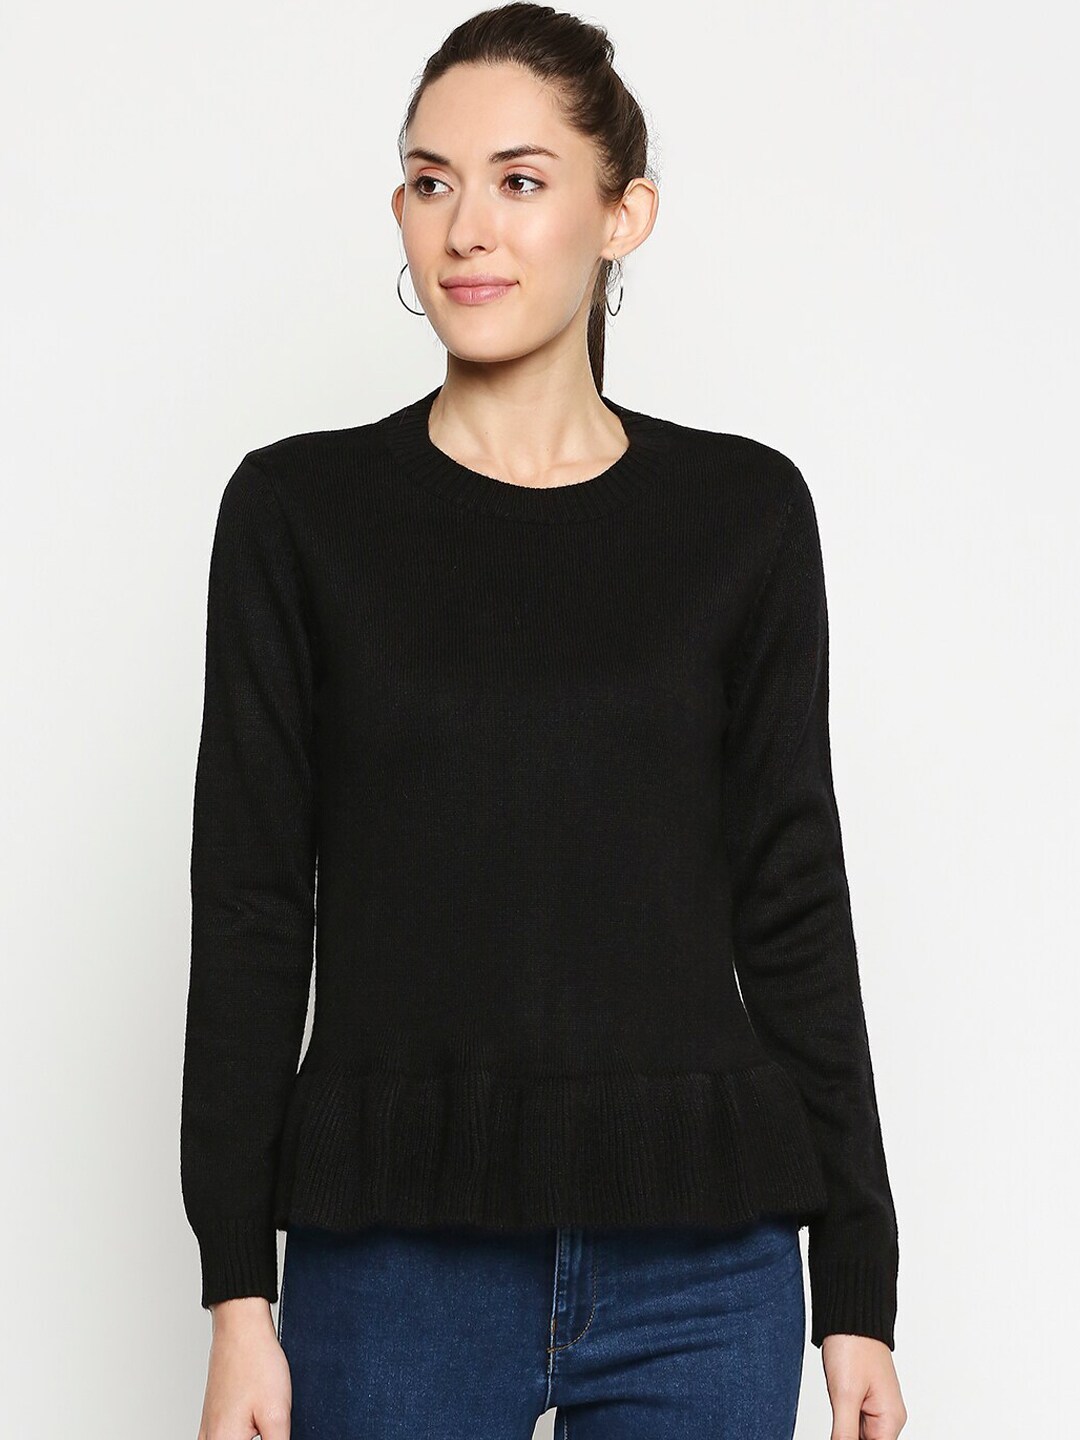 Annabelle by Pantaloons Women Black Solid Pullover Sweater Price in India